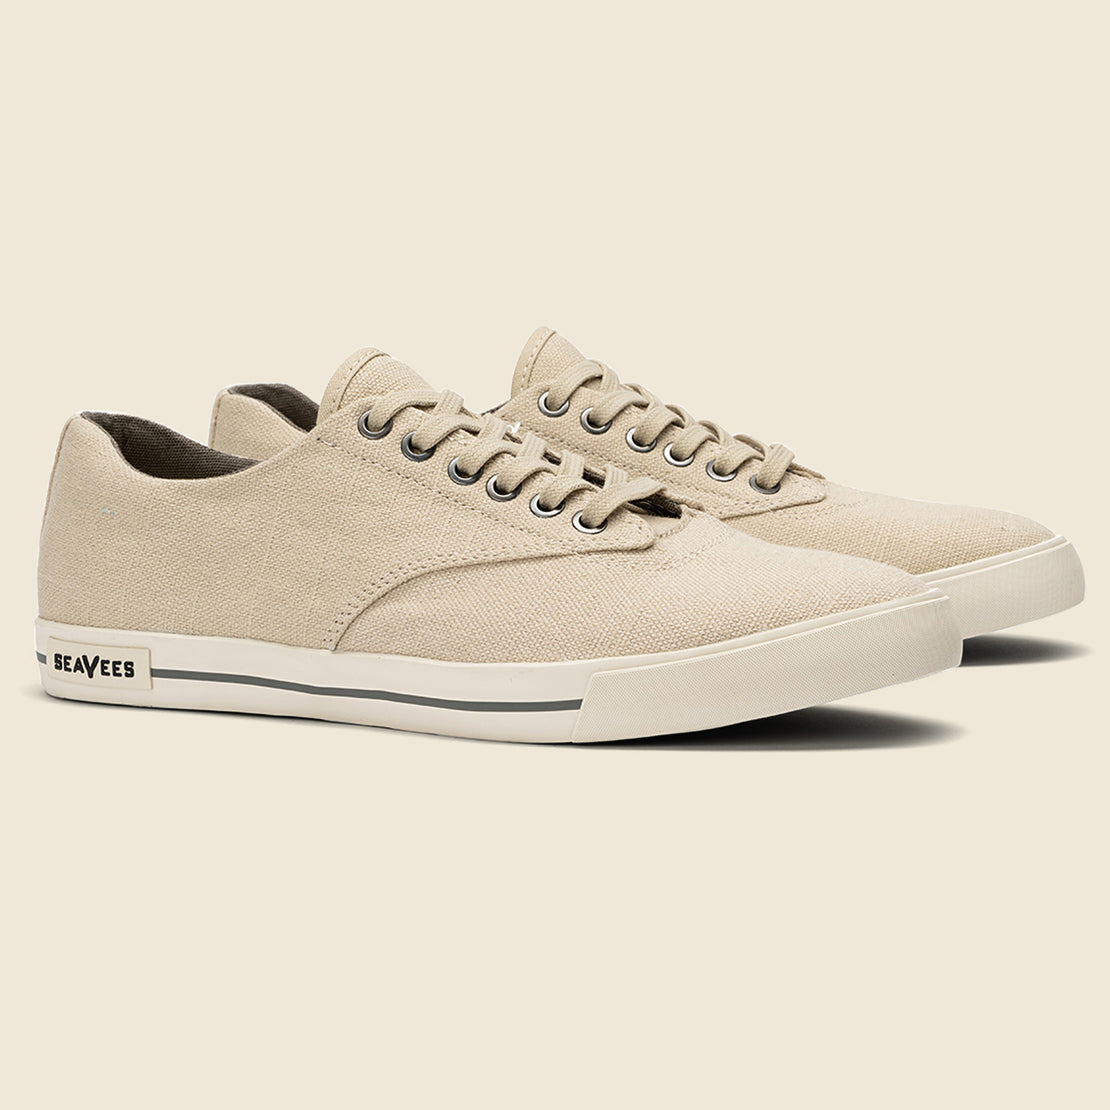 Hermosa Plimsoll - Natural - Seavees - STAG Provisions - Shoes - Athletic